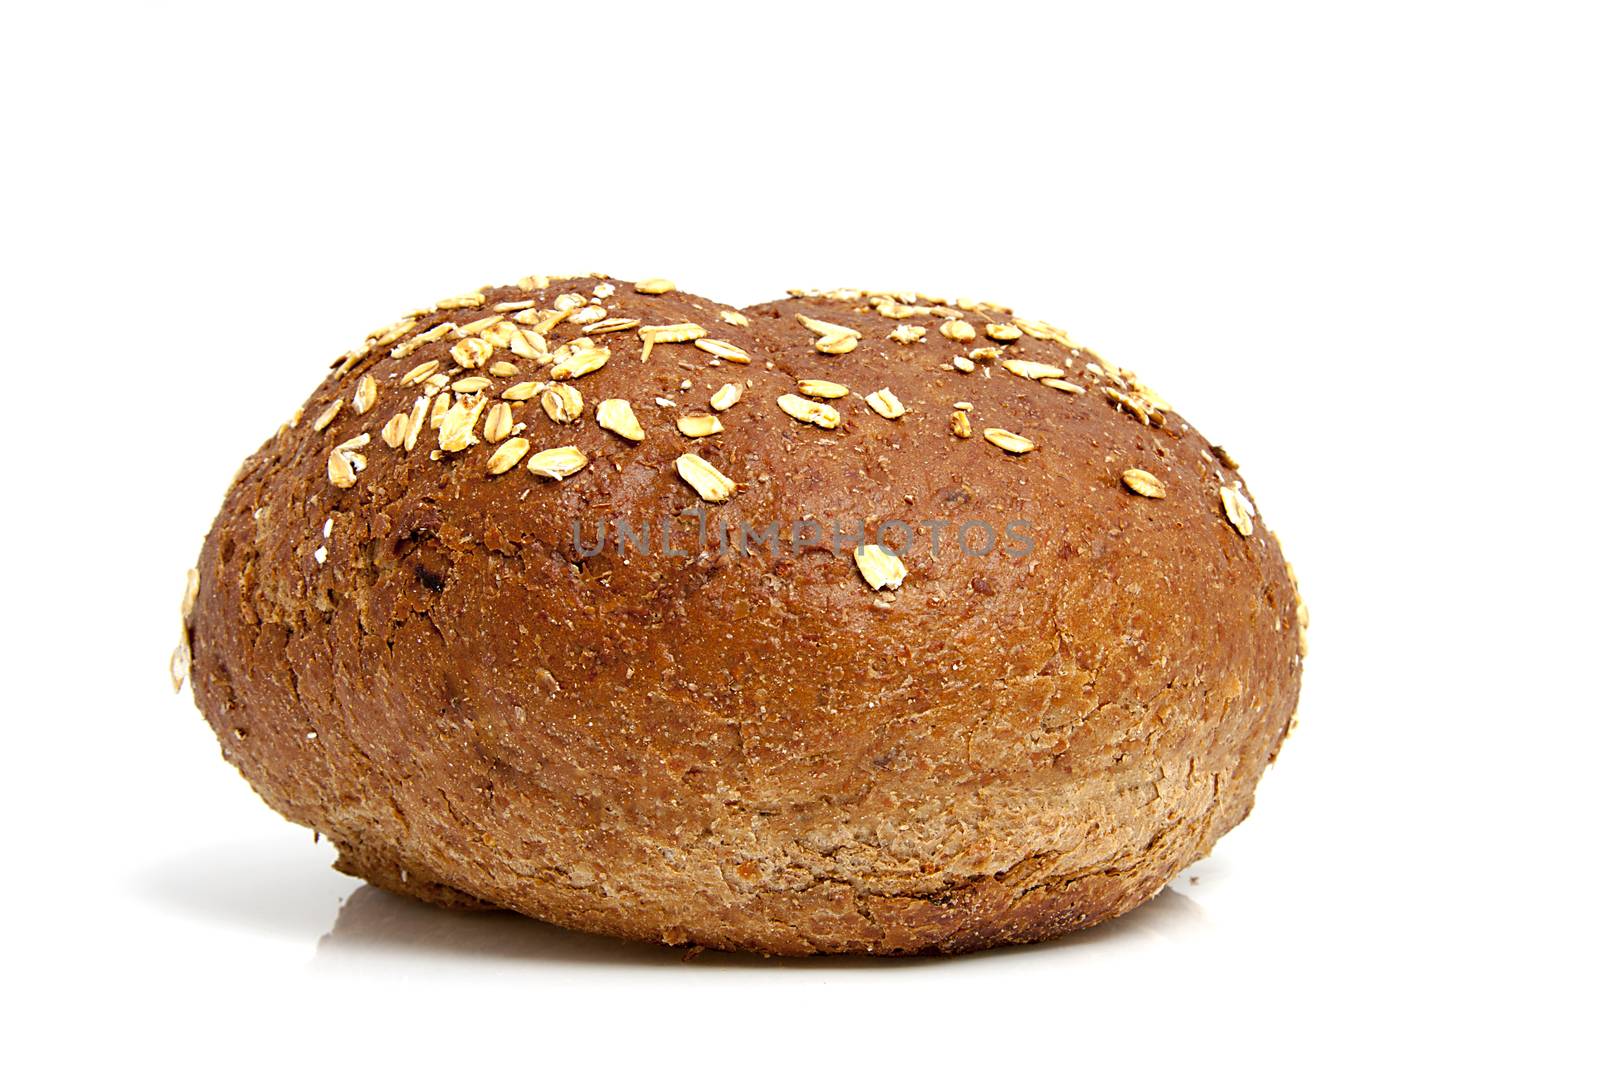 One healthy home baked bun on white background